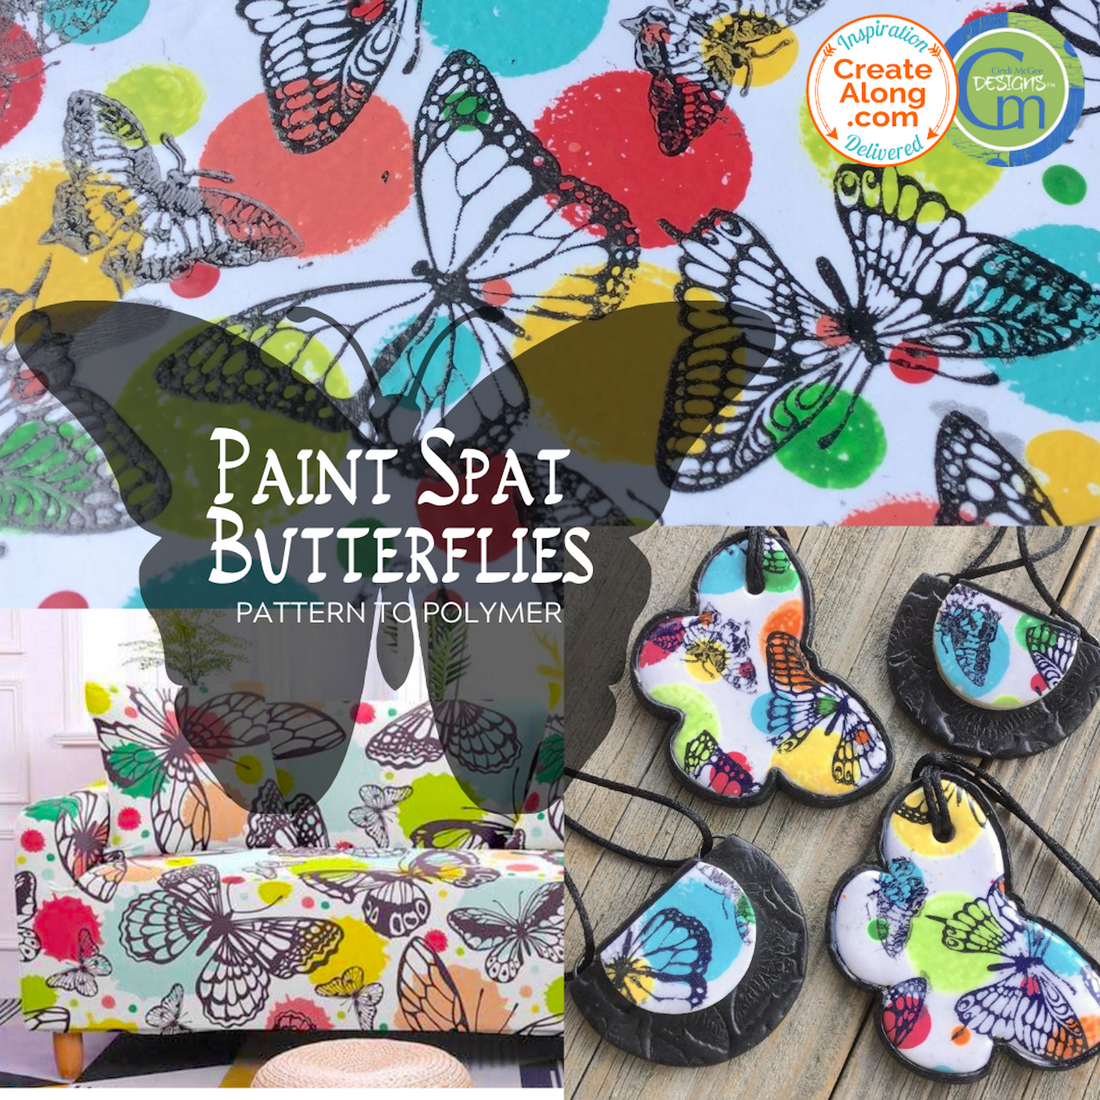 How to make a Butterfly Slab out of Polymer Clay. Quick and easy Tutorial!